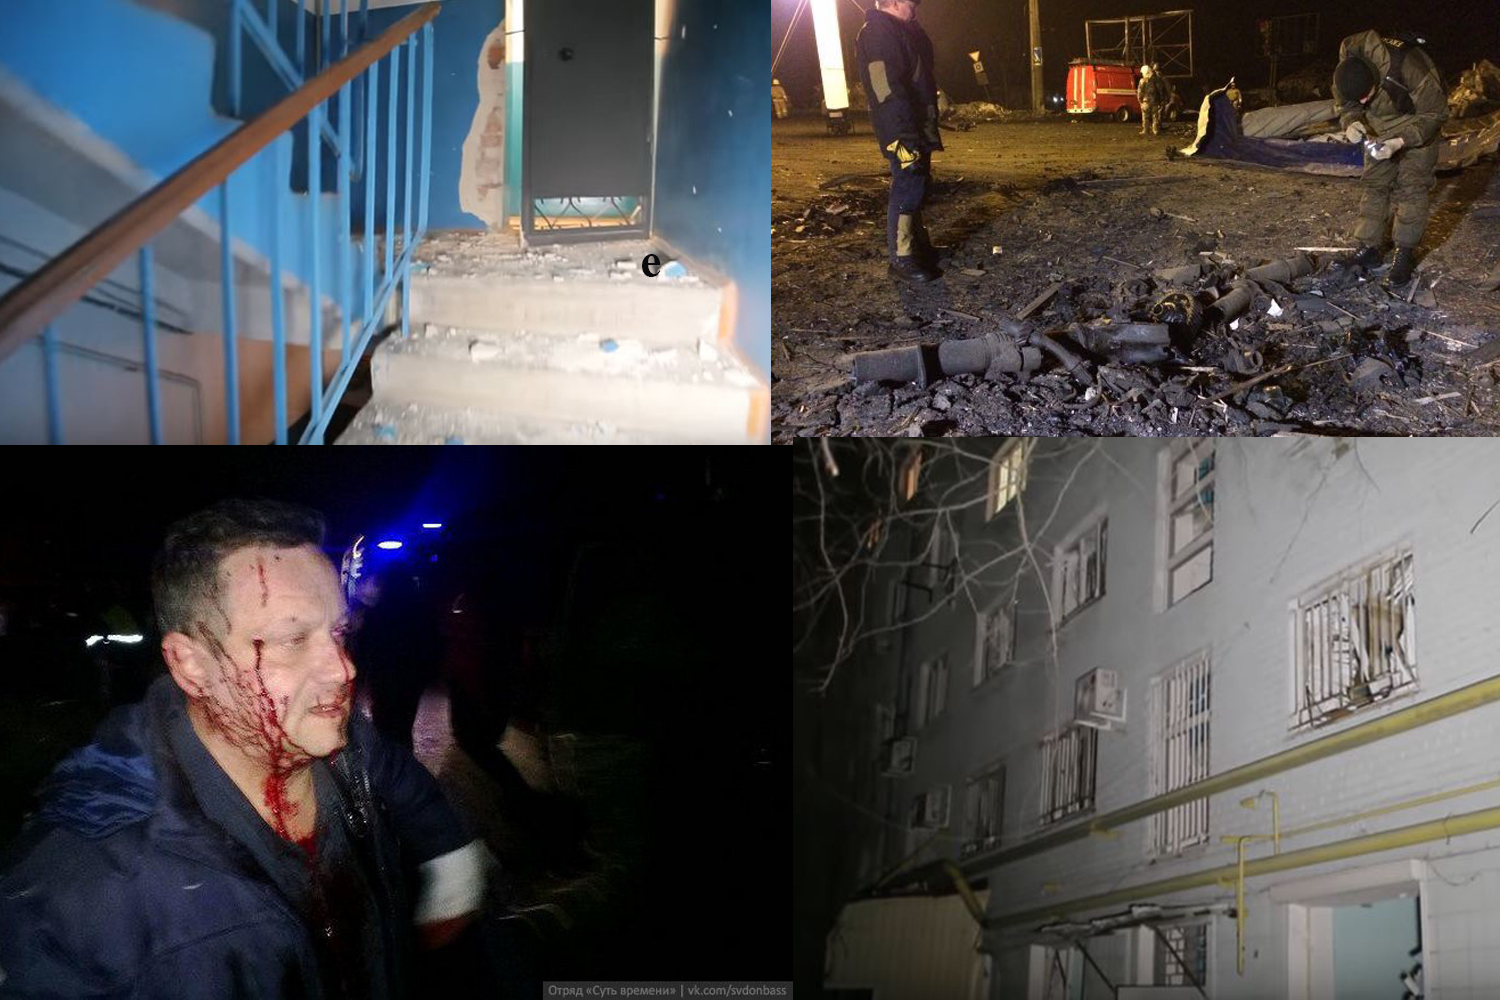 Sequences of the horrible attack by Ukrainian criminals with MRLS URAGAN at Donetsk (VIDEO)